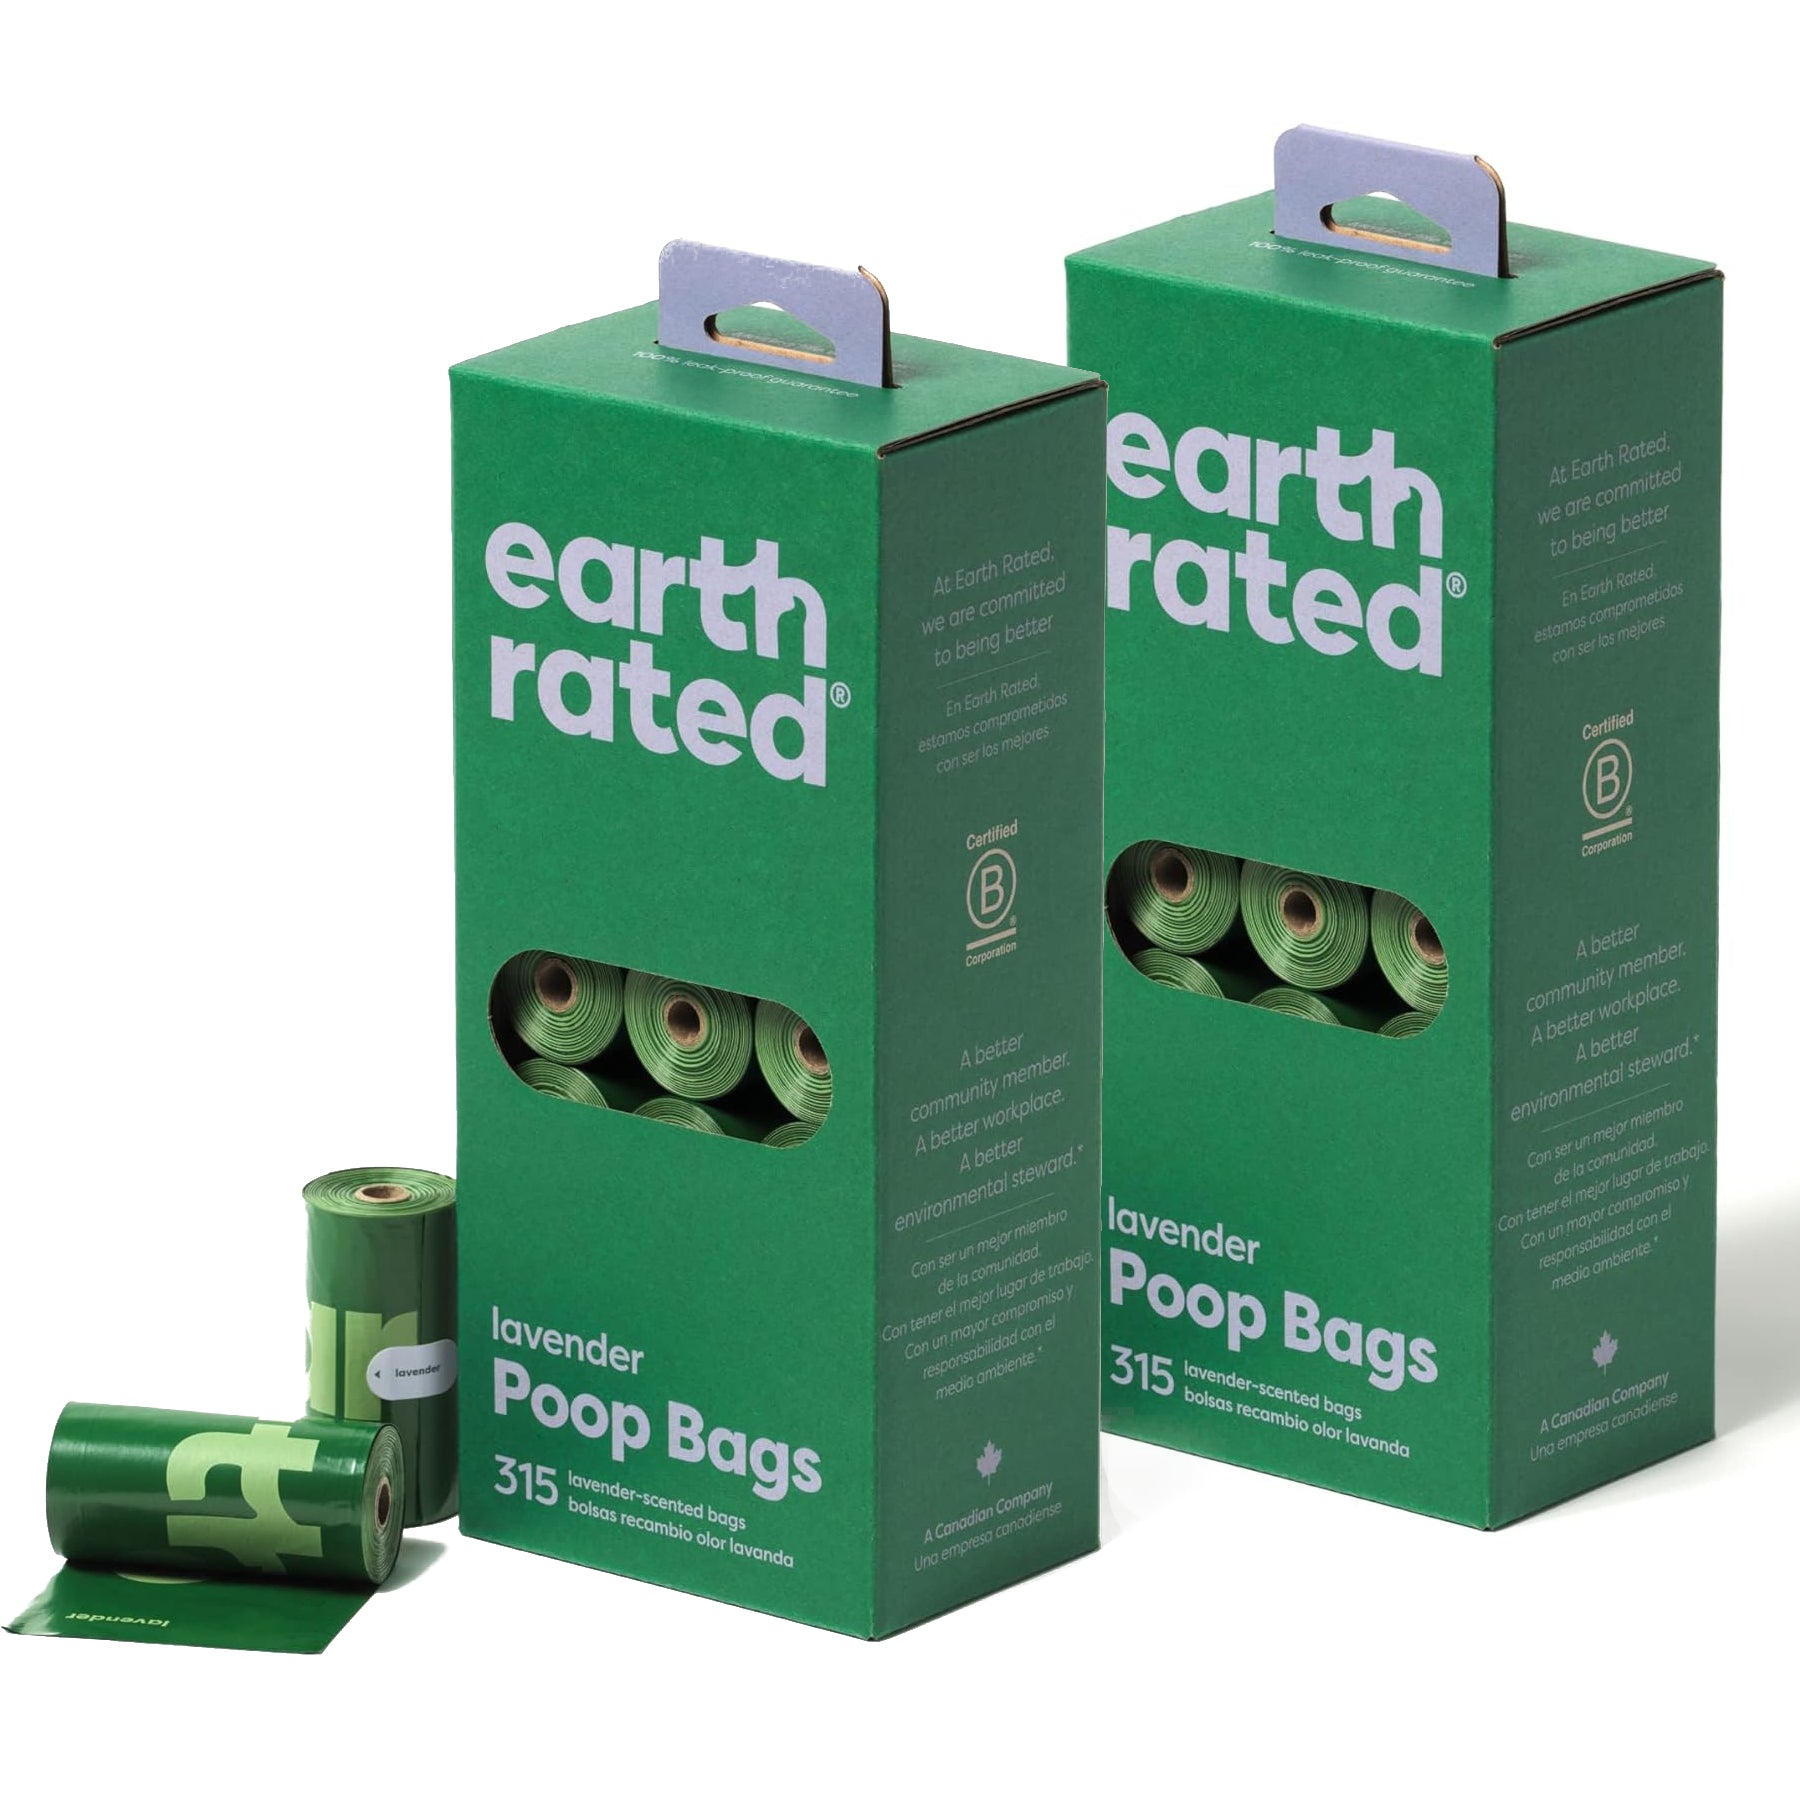 Earth Rated Poo Bags 42 Rolls (630) Scented (2 box BULK deal)